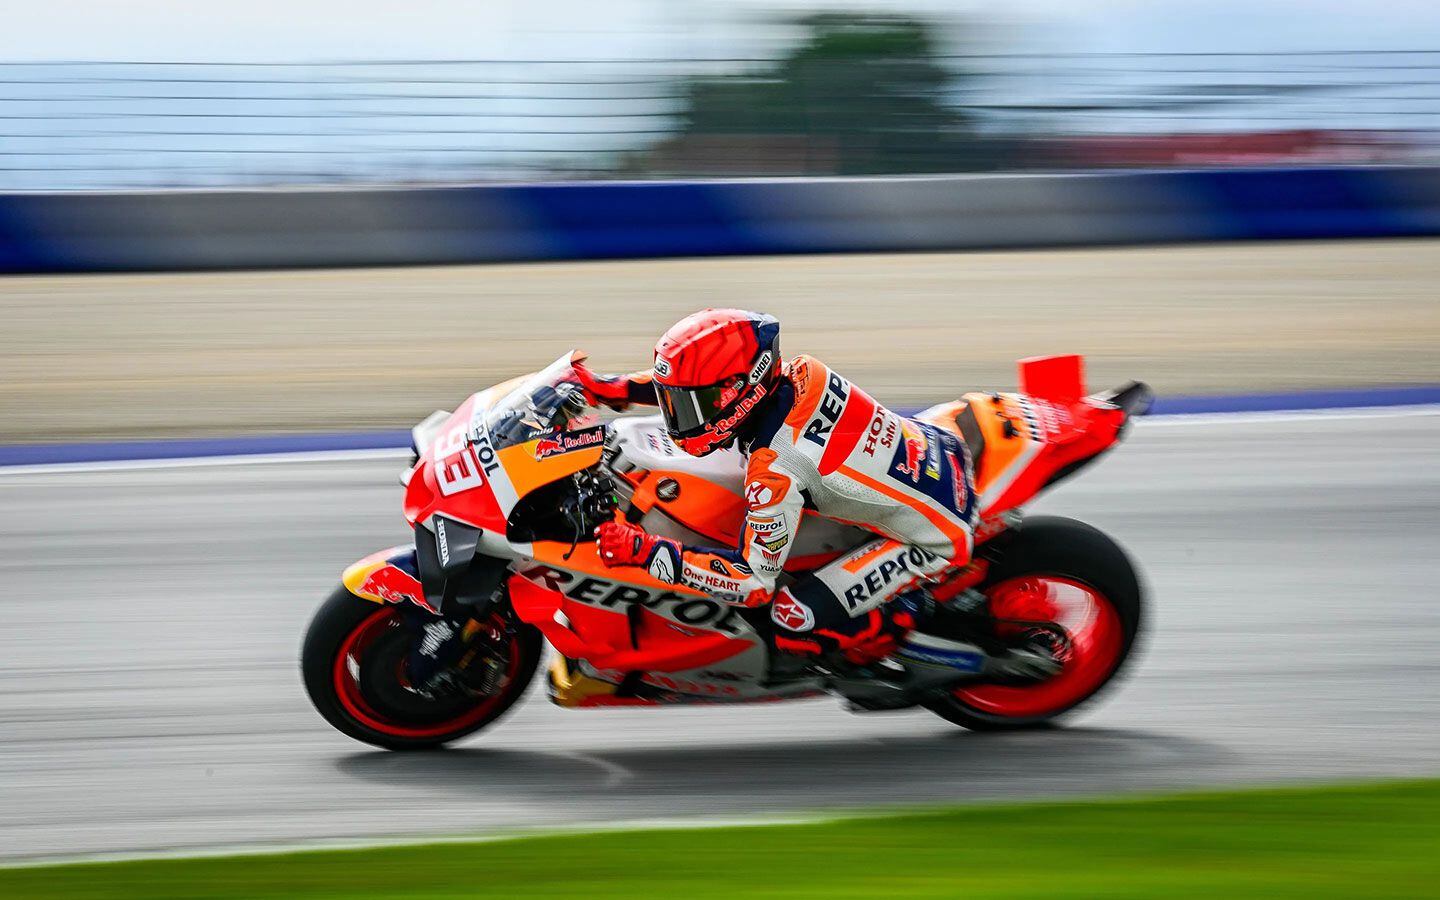 Marc Márquez has said he will ride less aggressively in order to gather data for next year’s Honda.